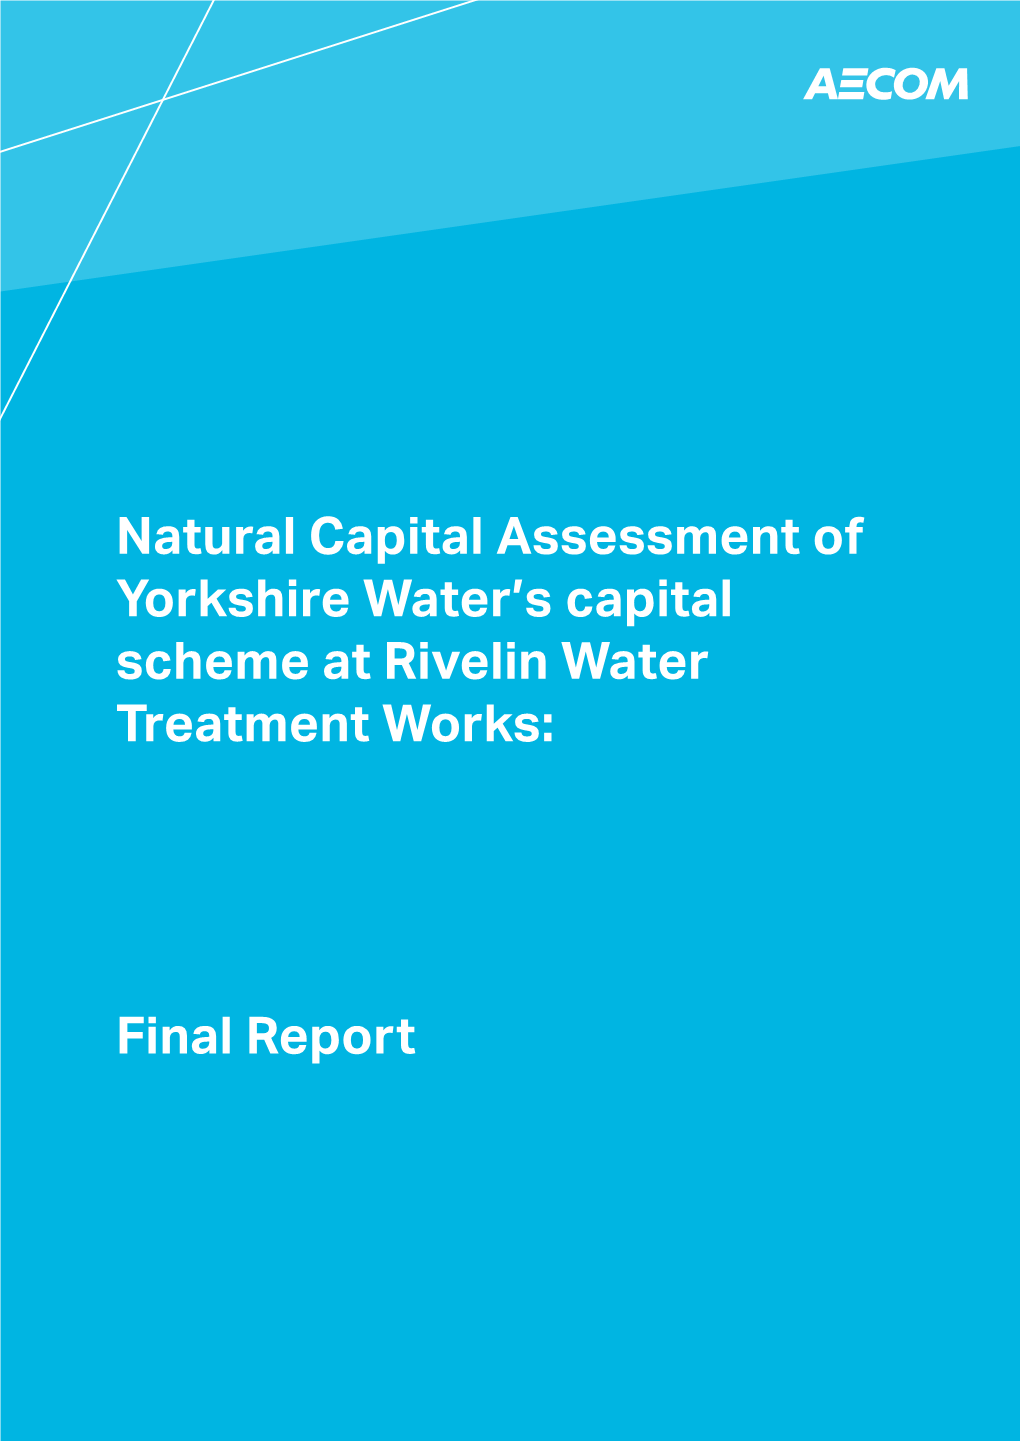 Natural Capital Assessment of Yorkshire Water's Capital Scheme At